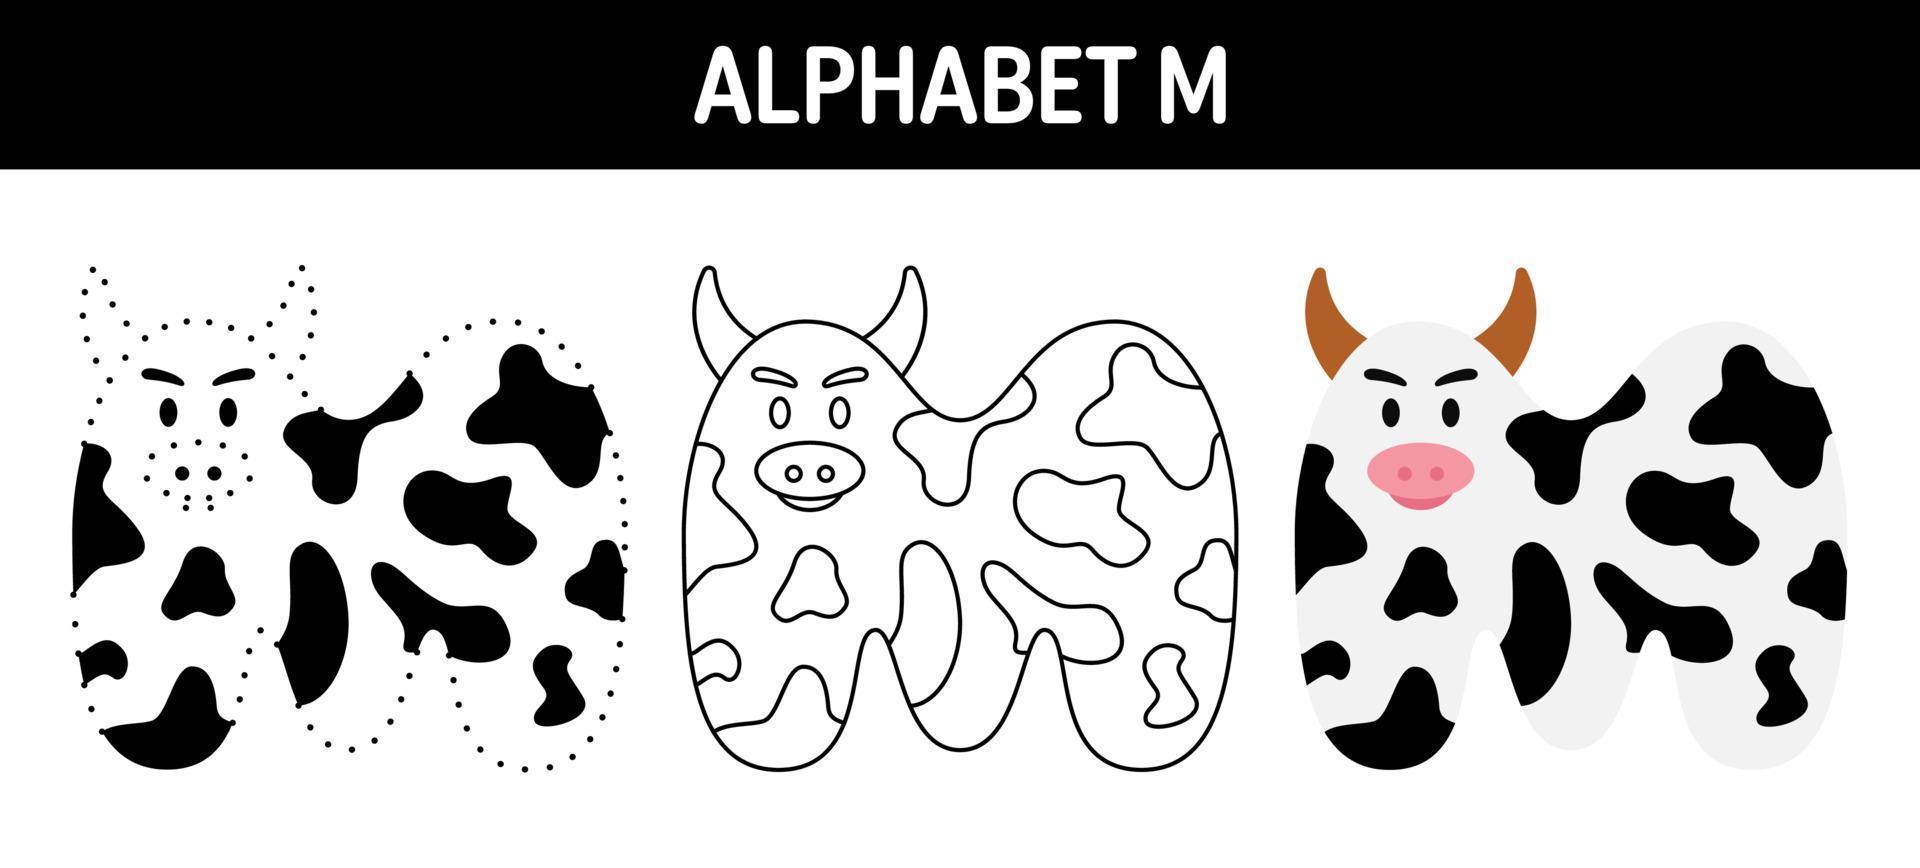 Alphabet M tracing and coloring worksheet for kids vector